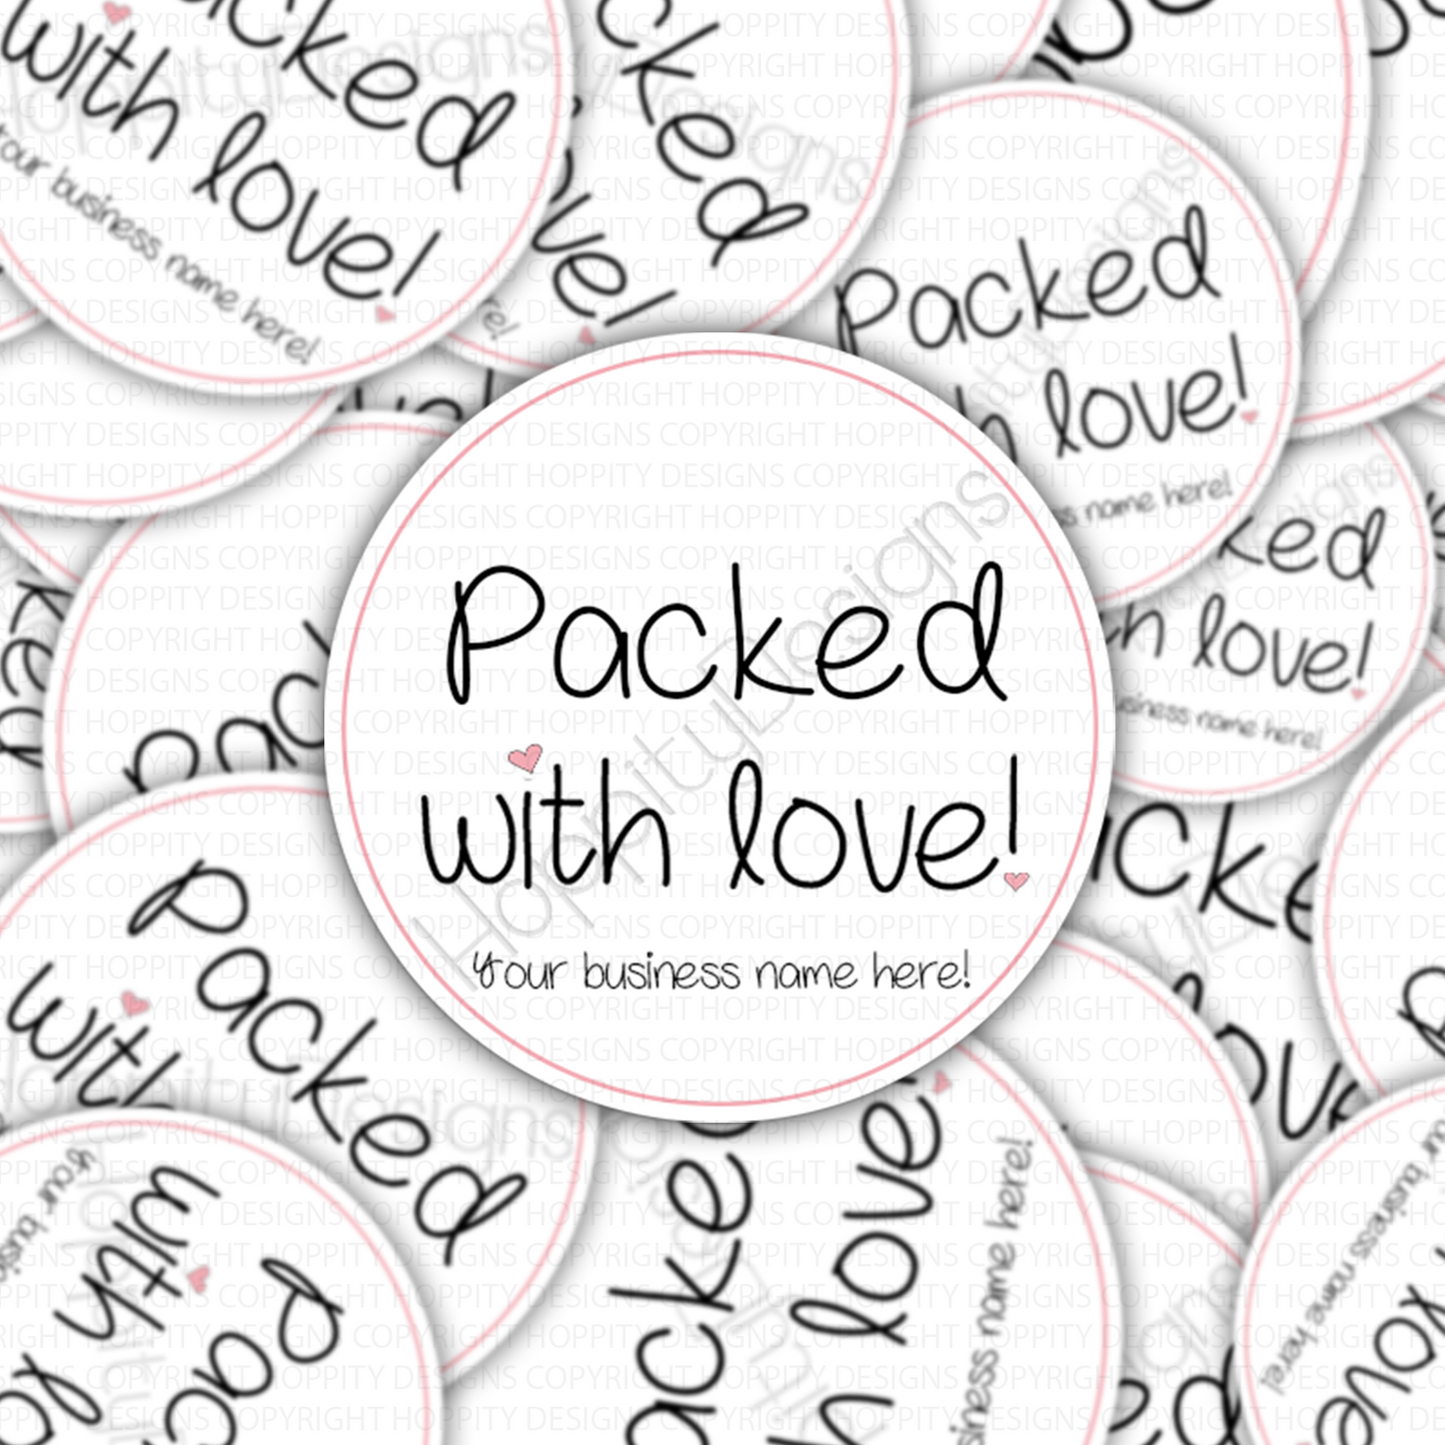 Packed with Love Stickers